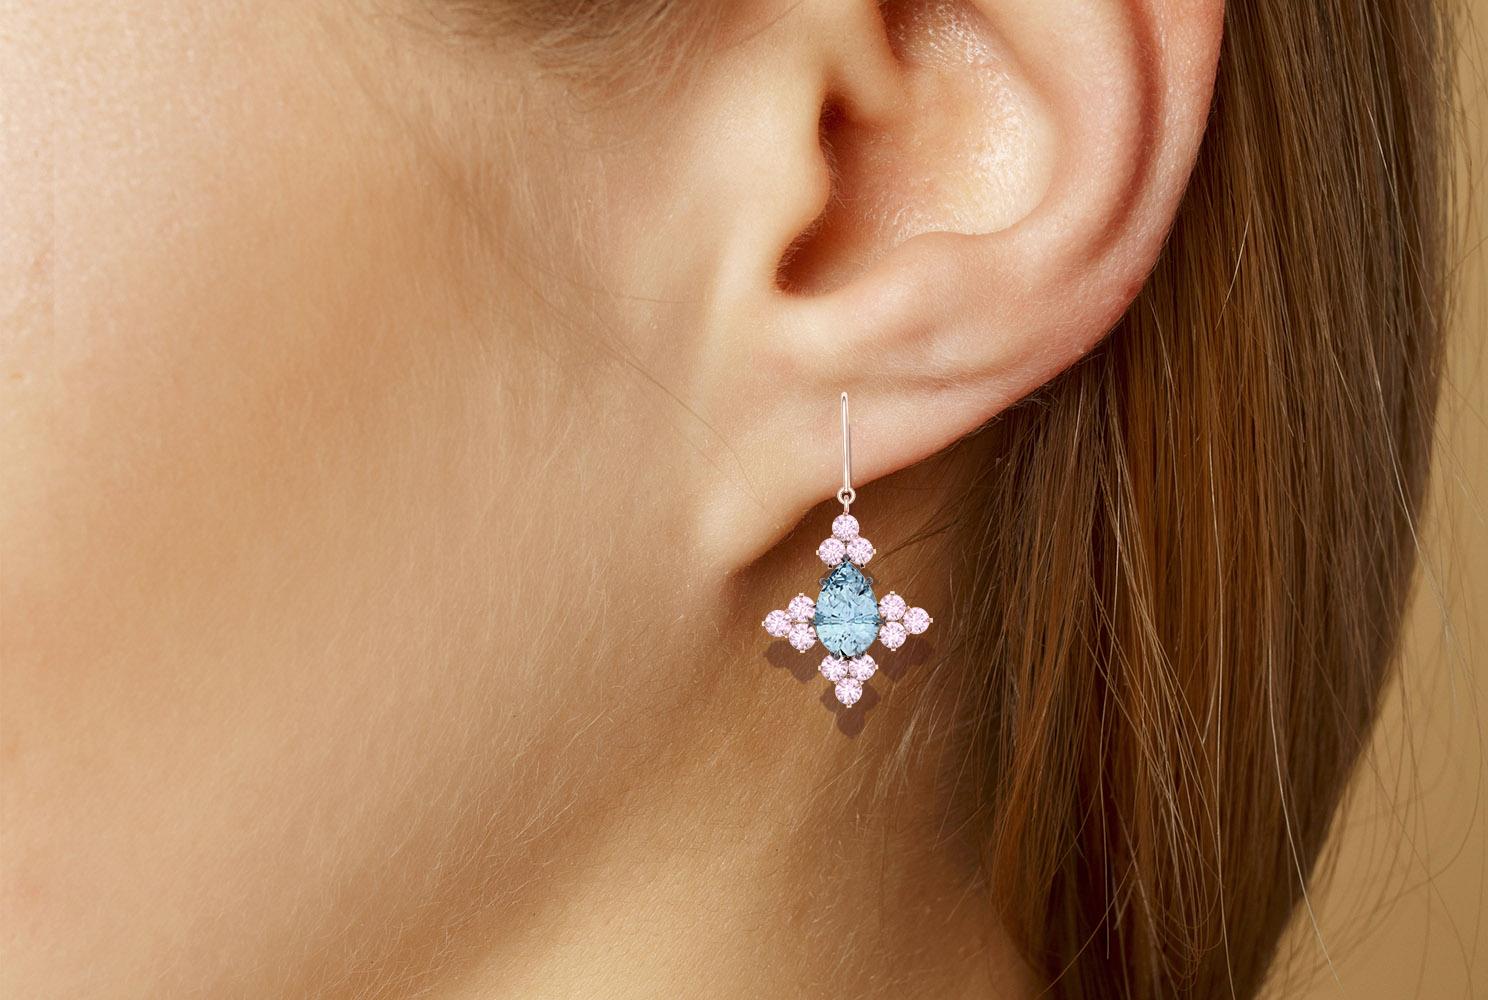 A simple pair of earrings are sometimes the best pair to wear daily and dress up for the night out.  These earrings have 2.5 carats of pear shape blue aquamarines.  These steel blue aquamarines are set in a grey silver head making the contrast